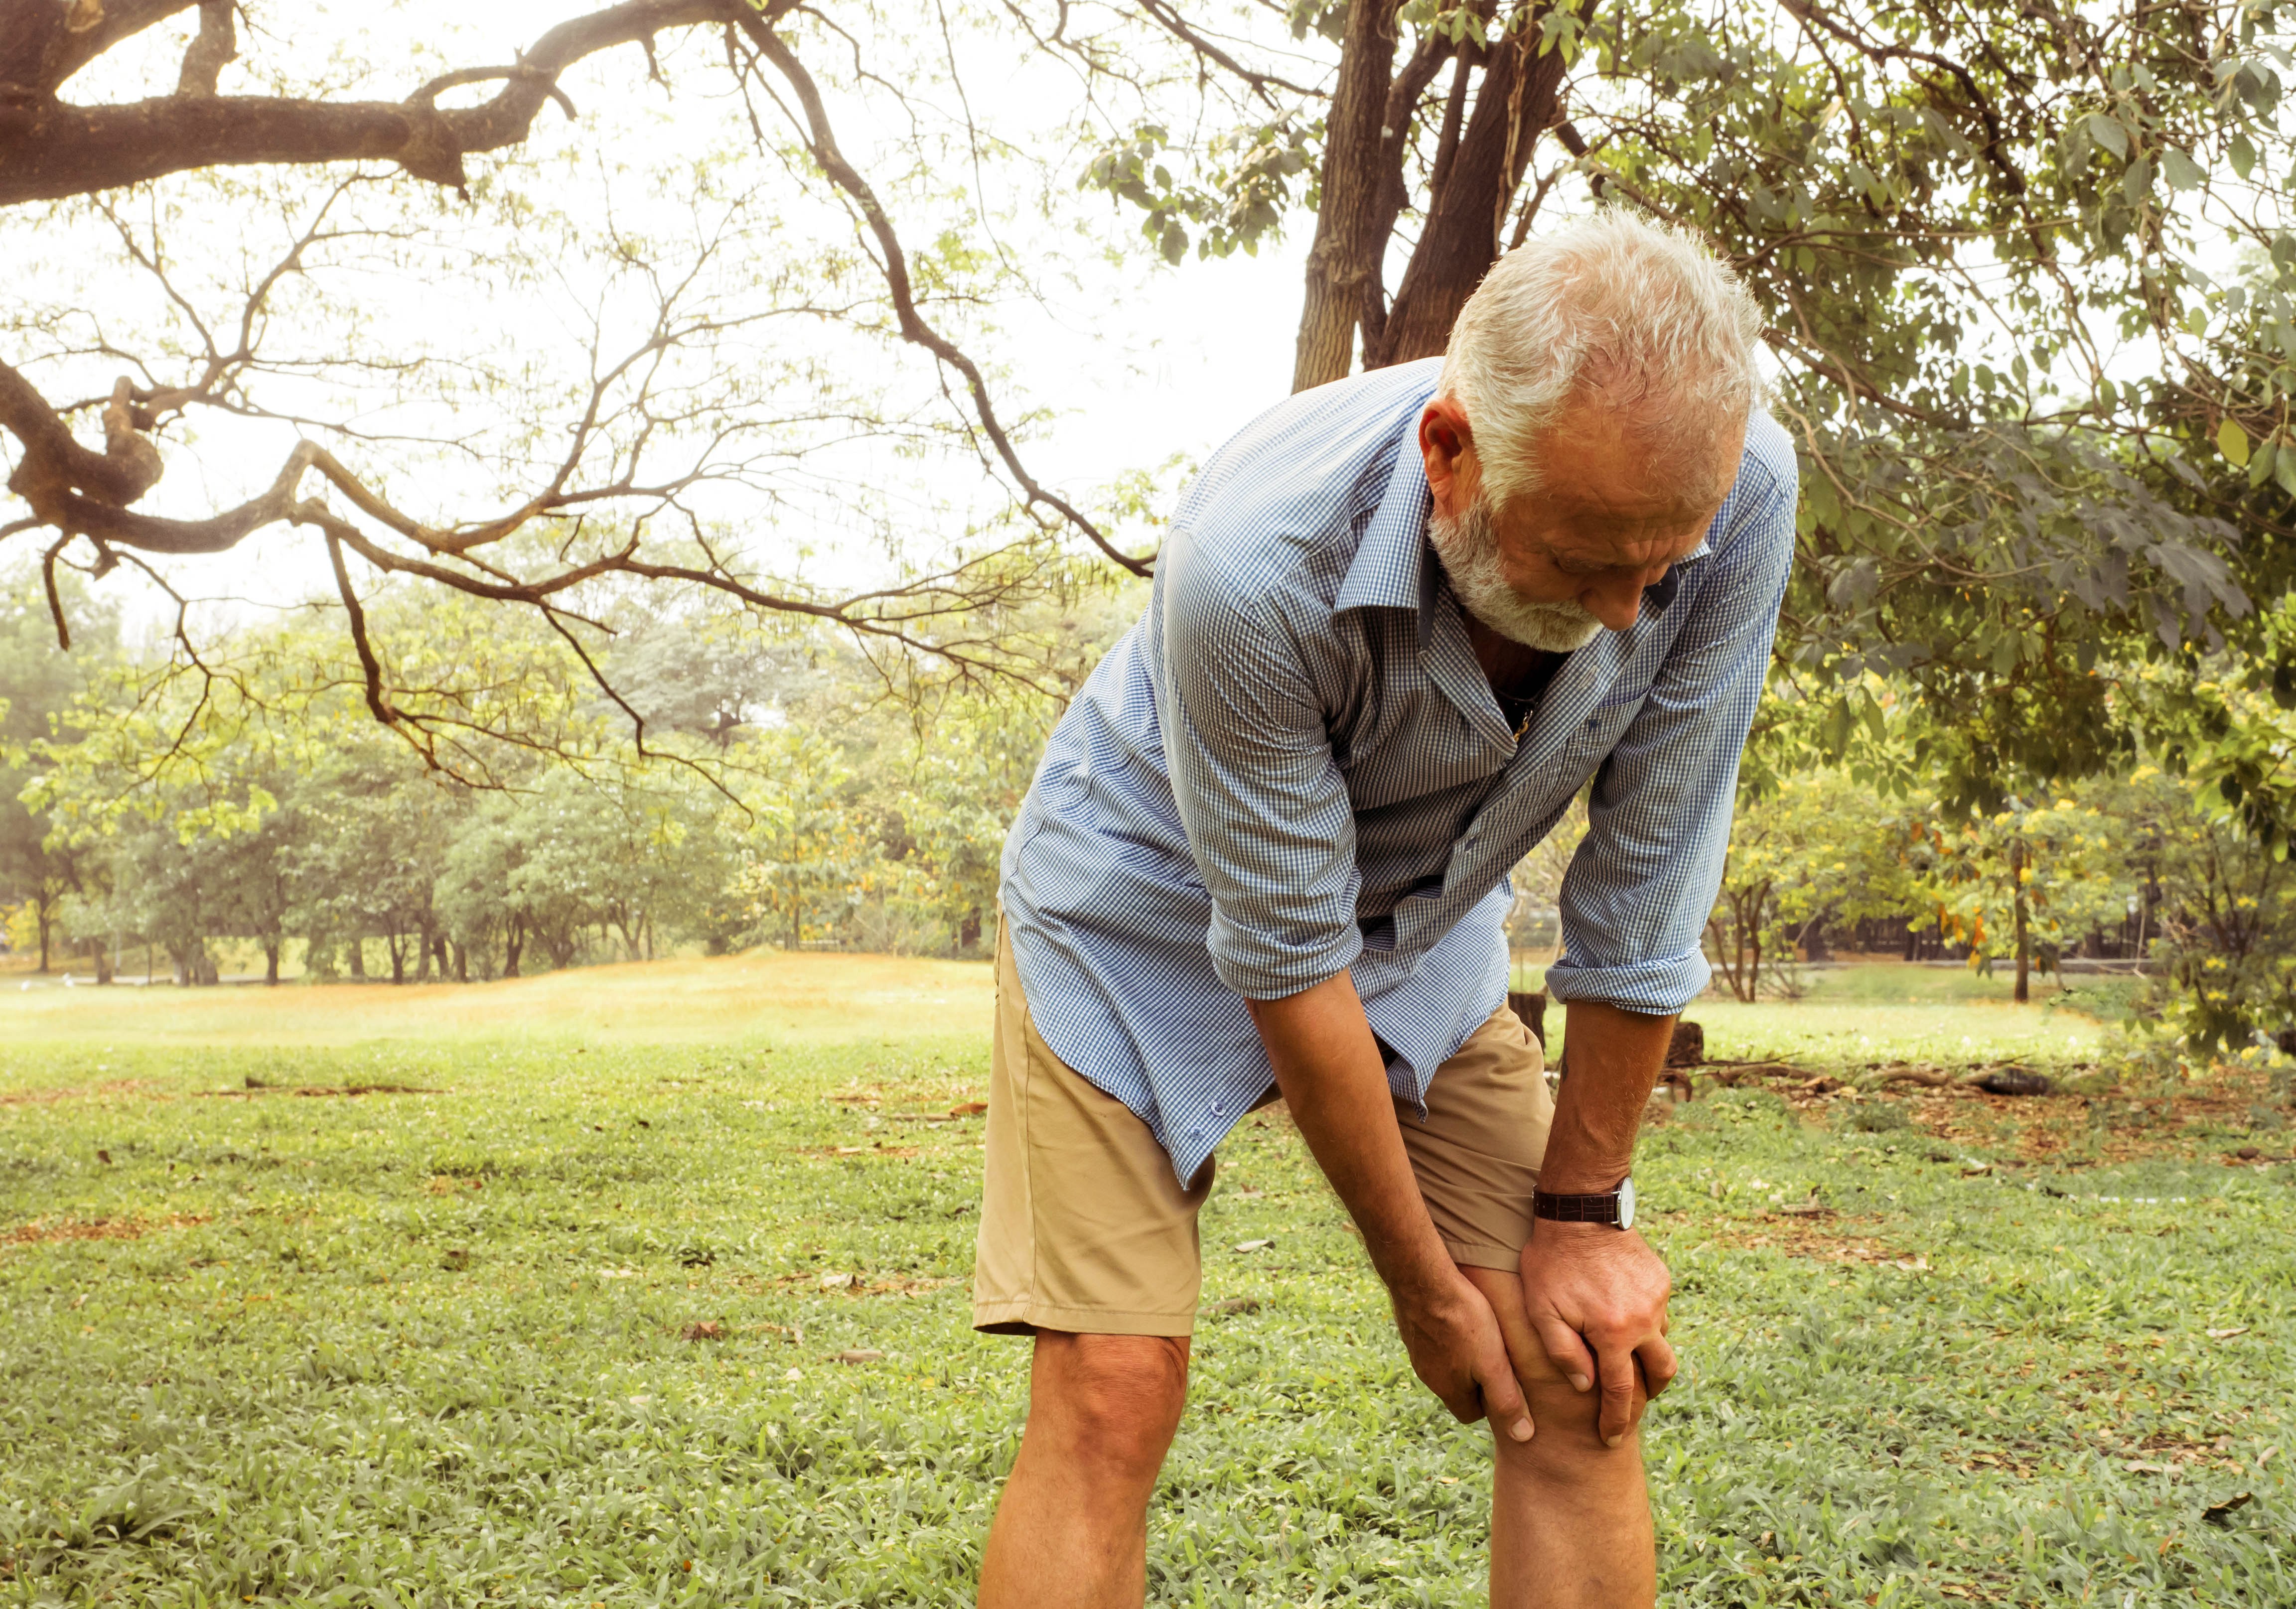 The old man could not walk much further owing to his knee pain. | Source: Getty Images